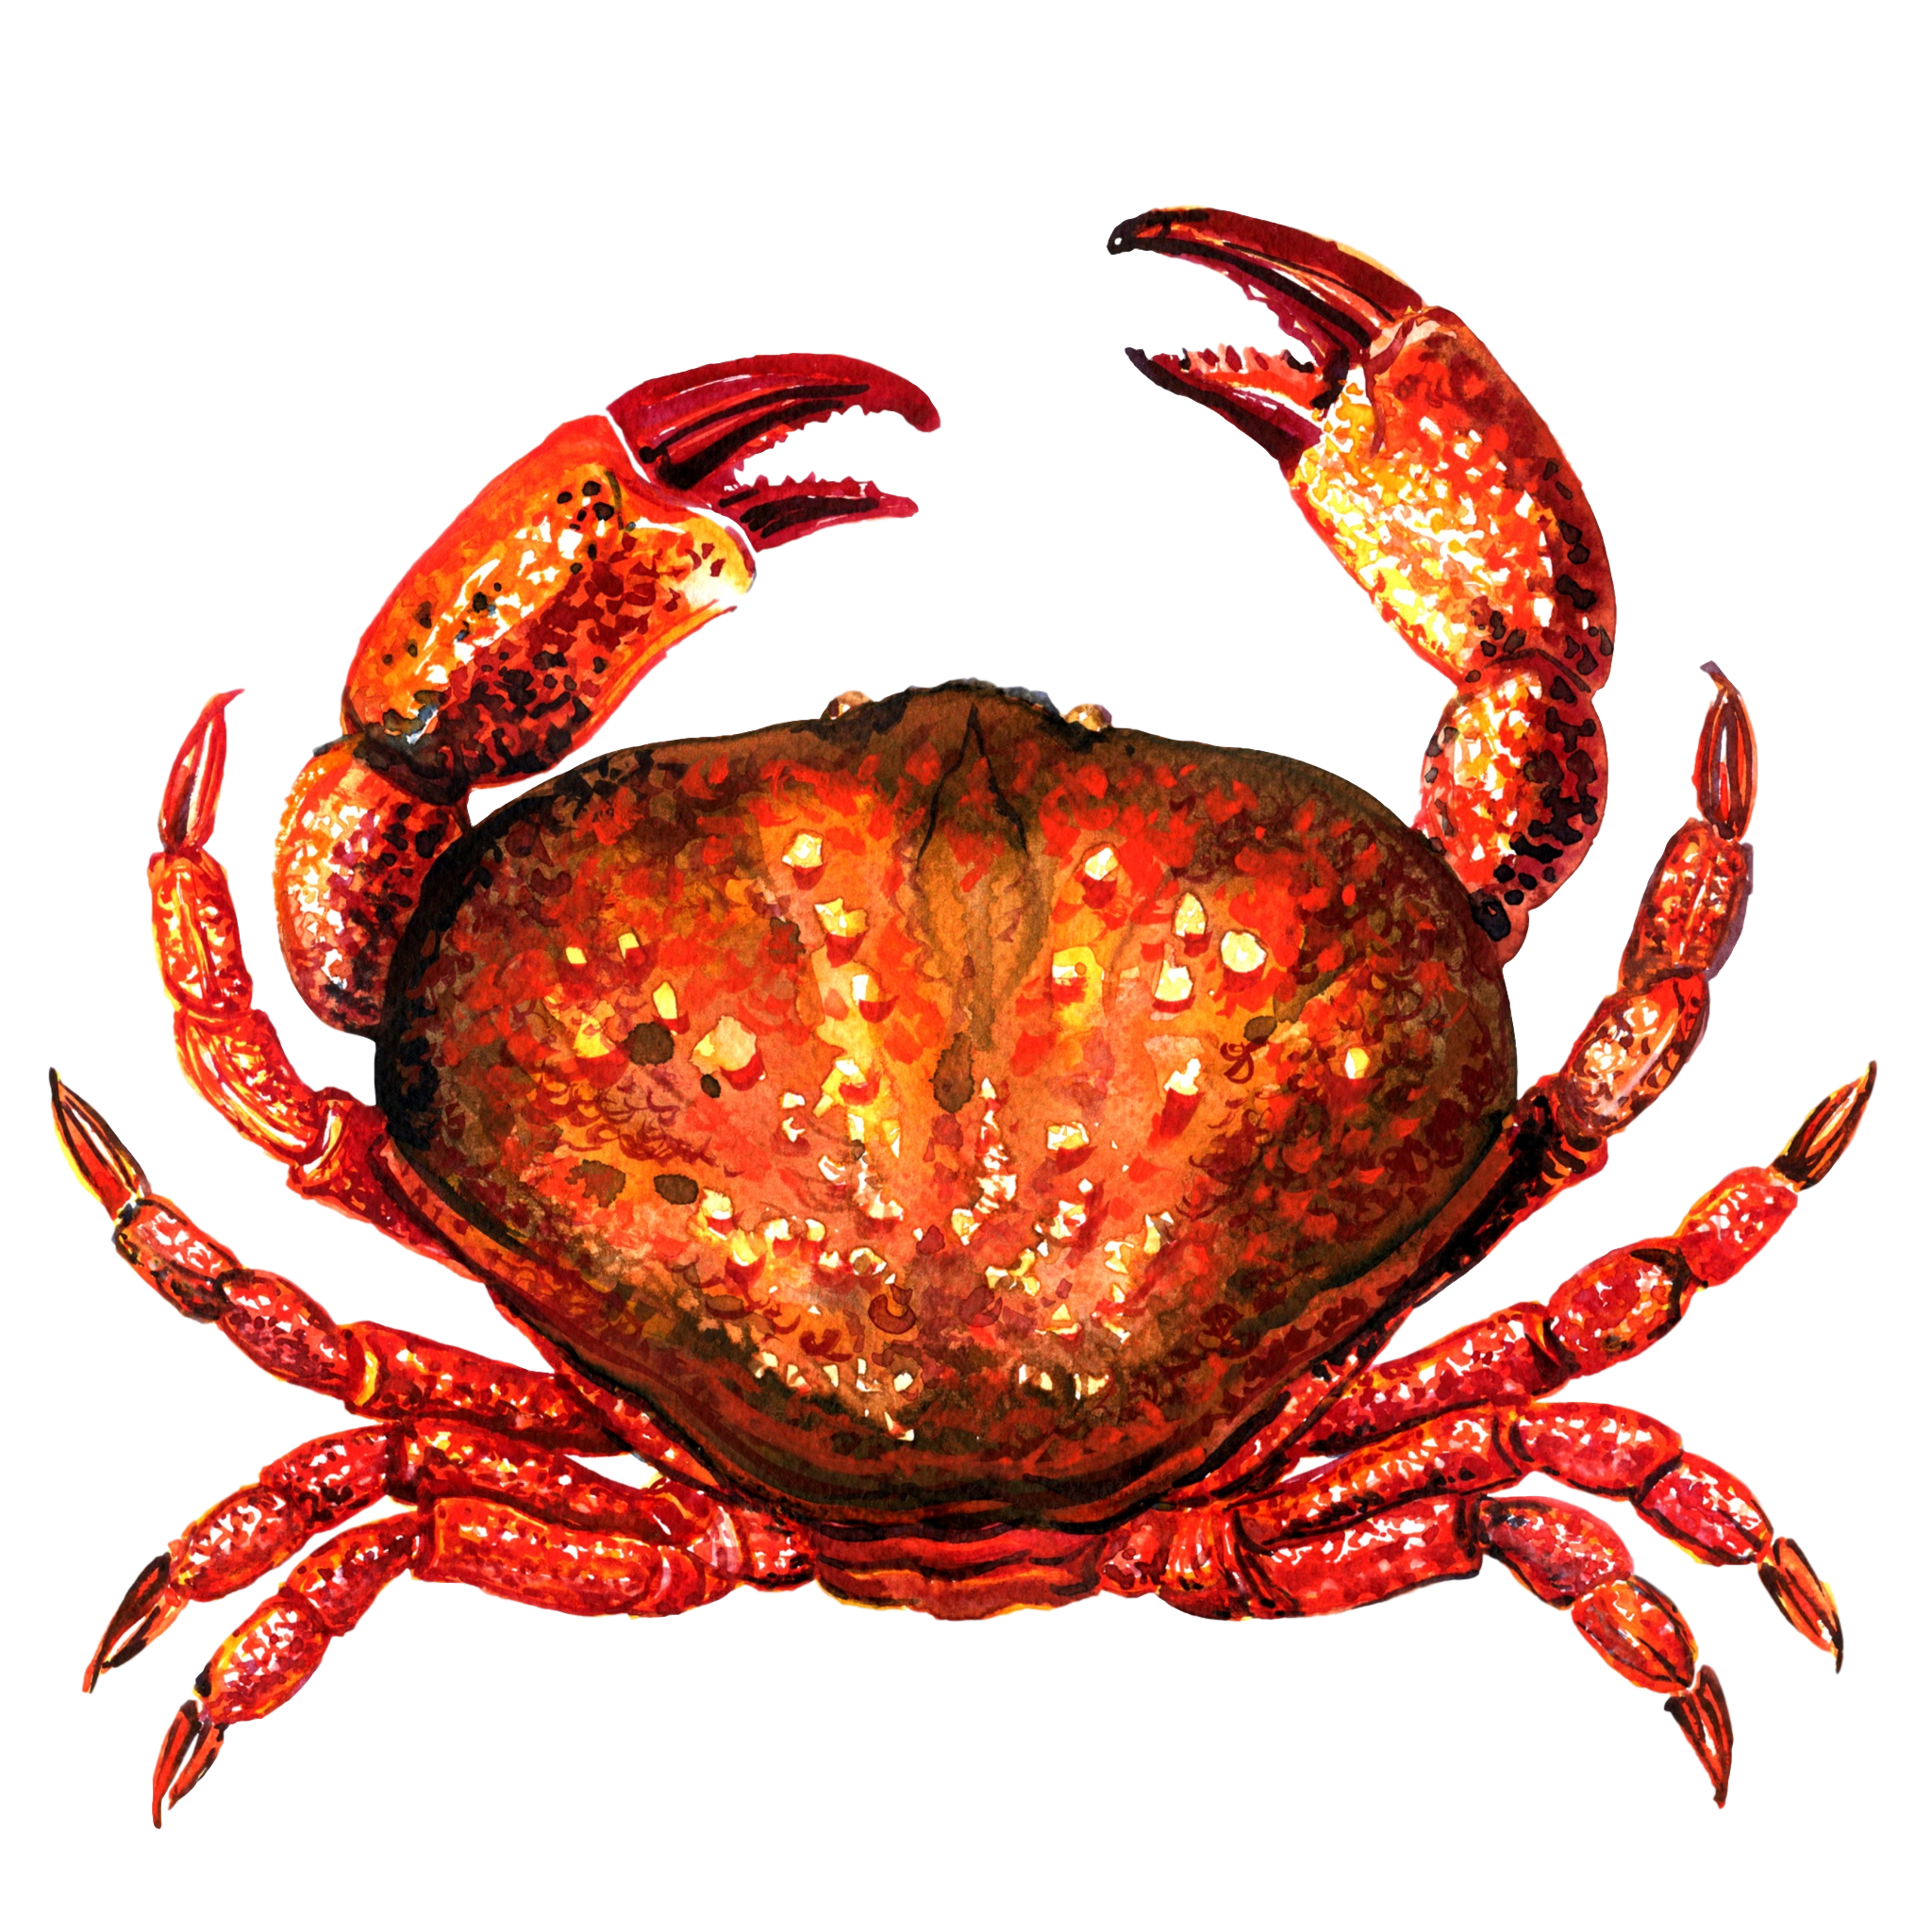 file crab for taiapure wikimedia commons 34513